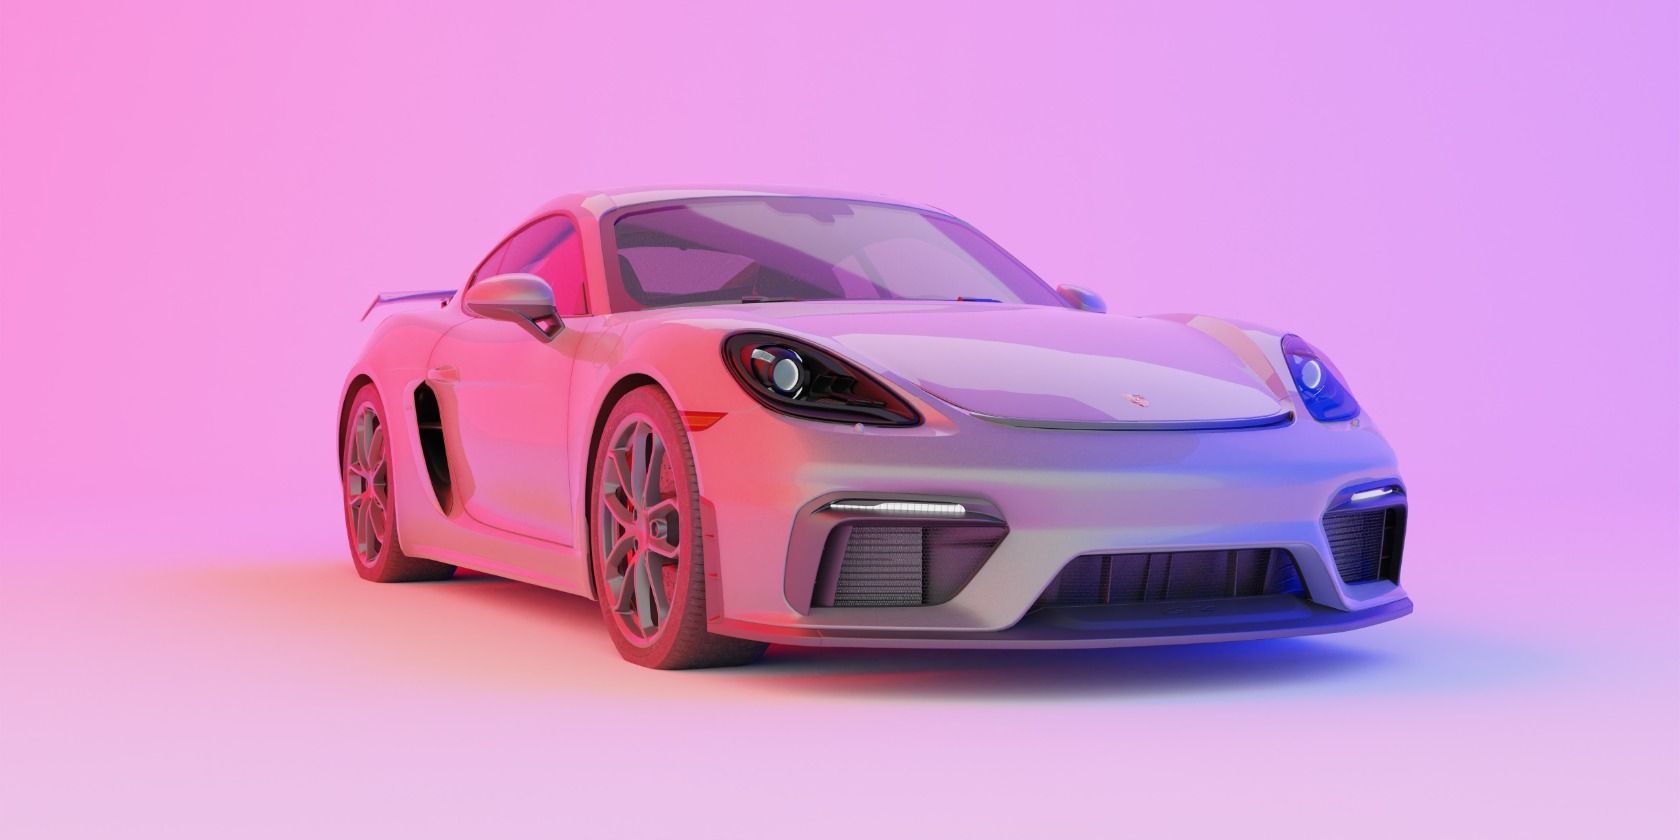 Digital 3D model of pink sports car in pink 3D environment